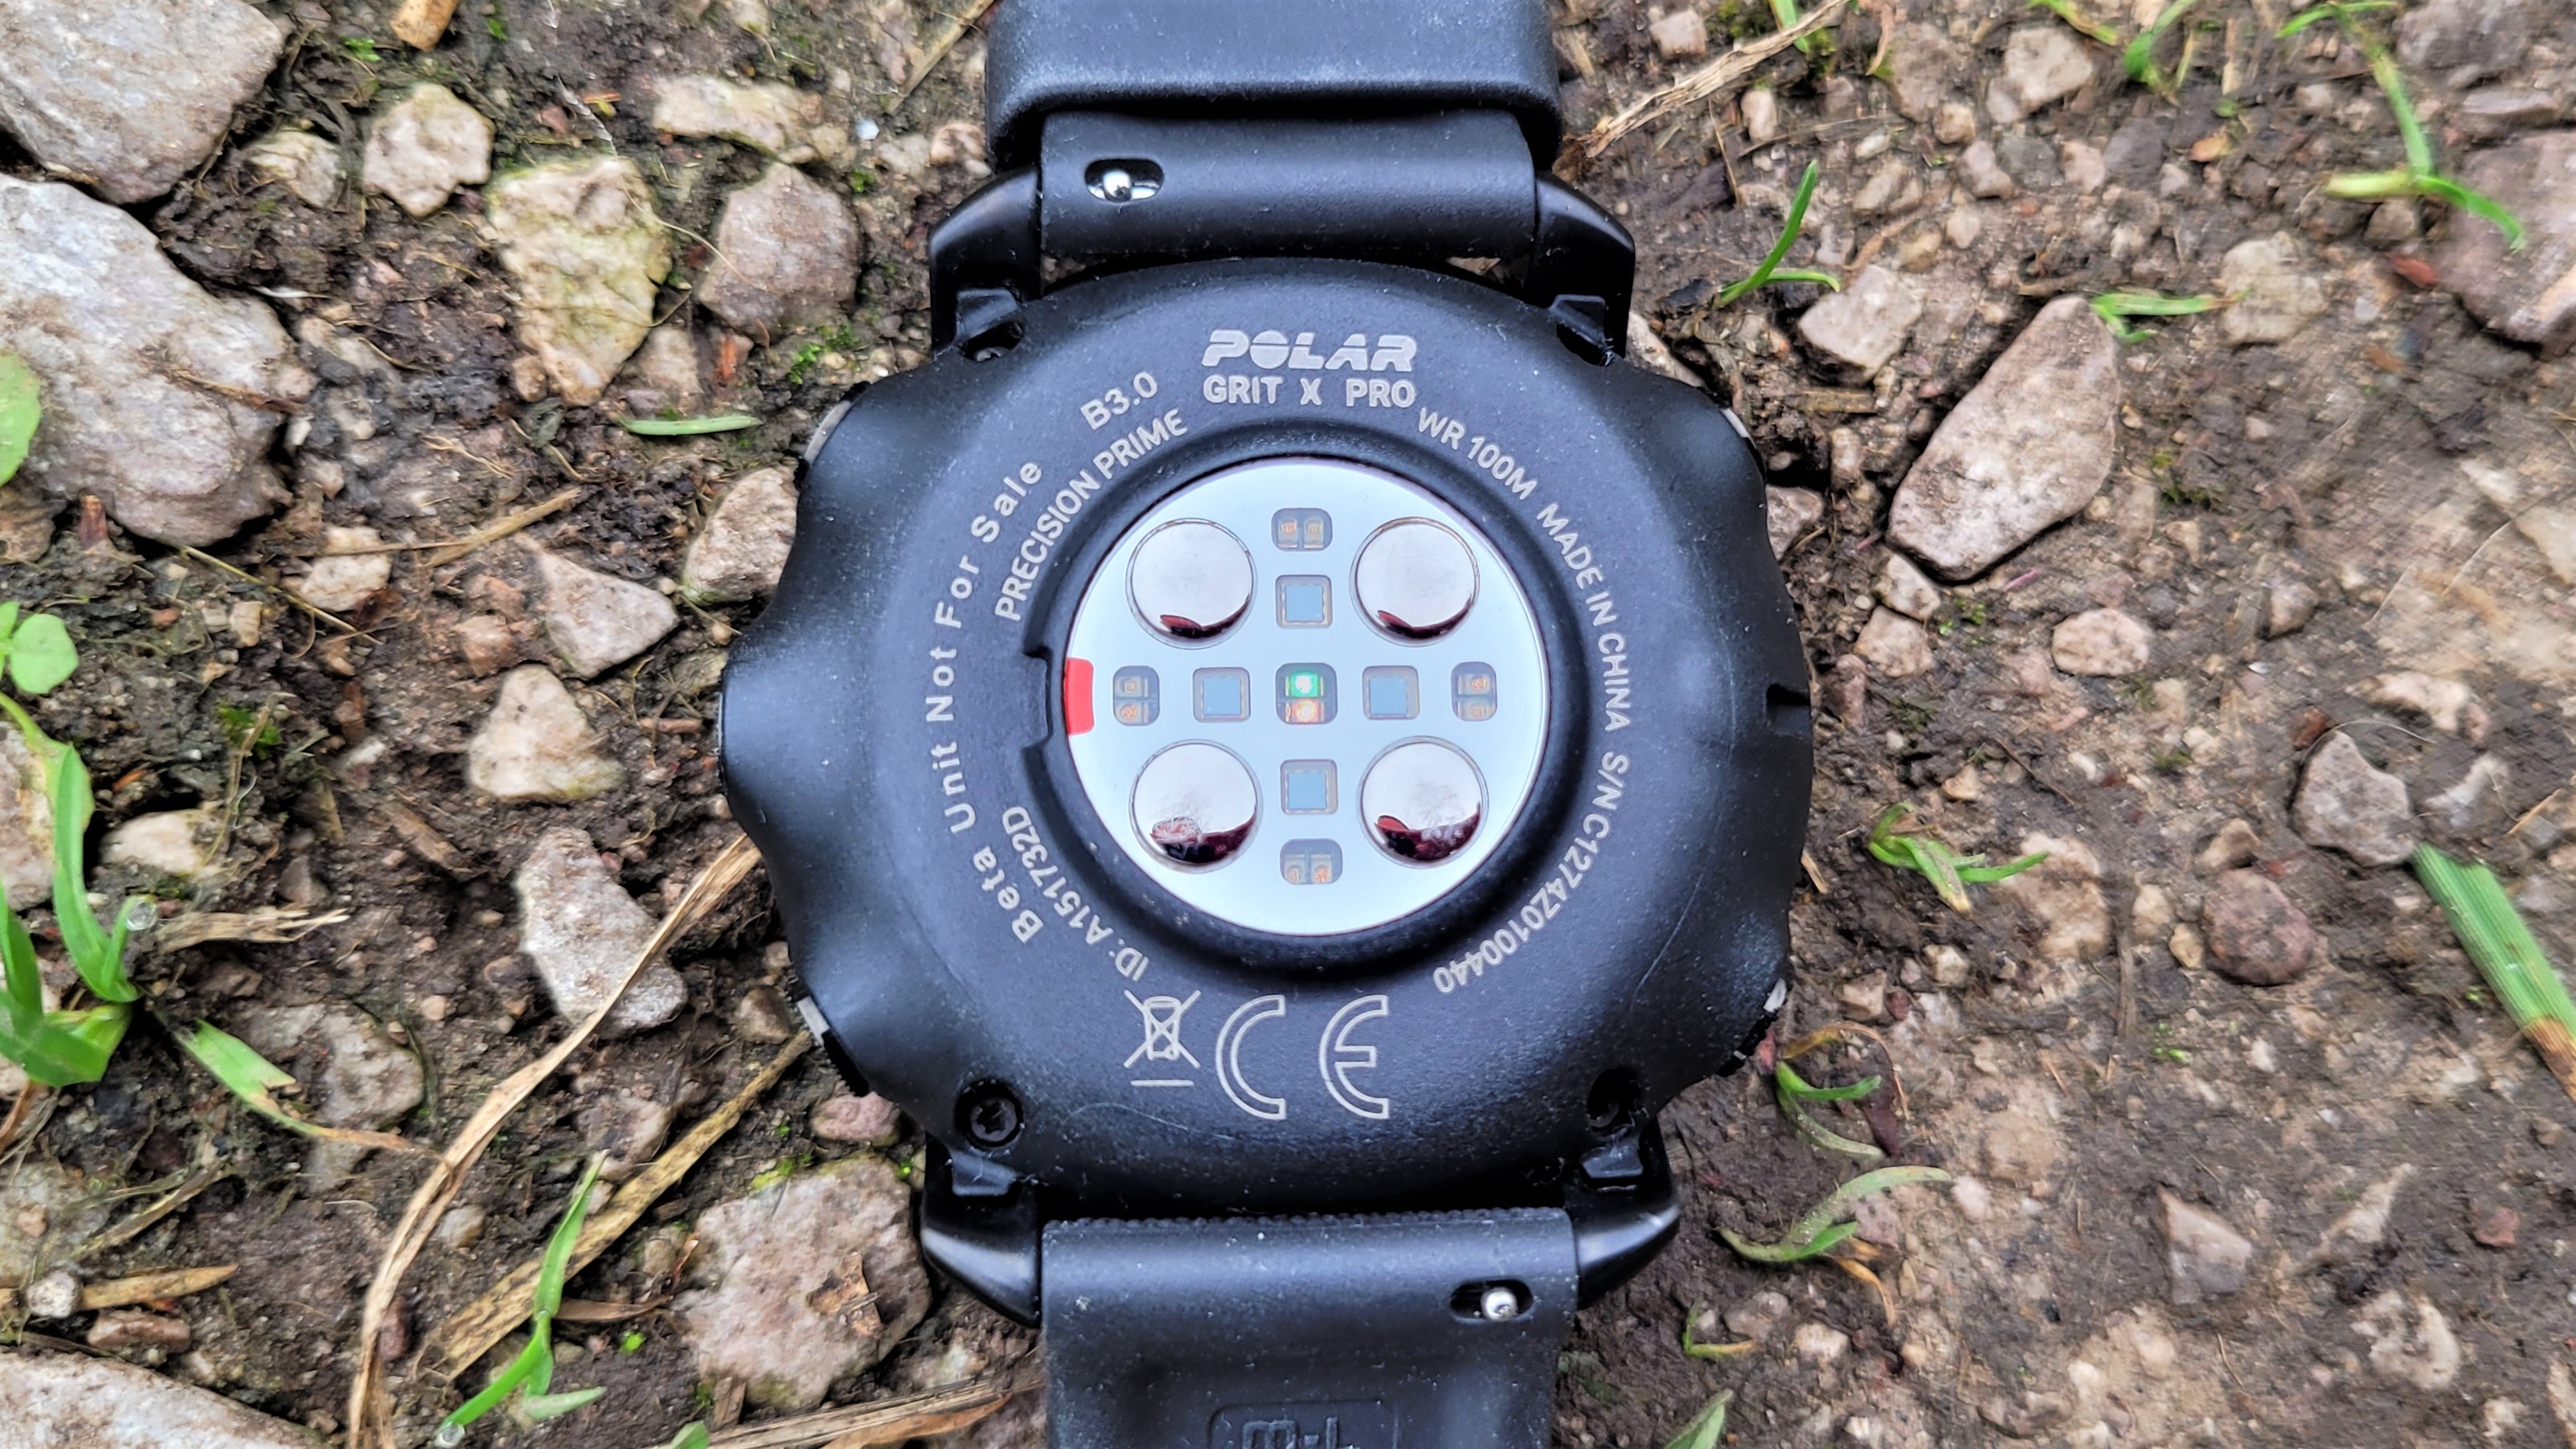 Rear of the Polar Grit X Pro, showing electrical contacts and optical heart rate sensor